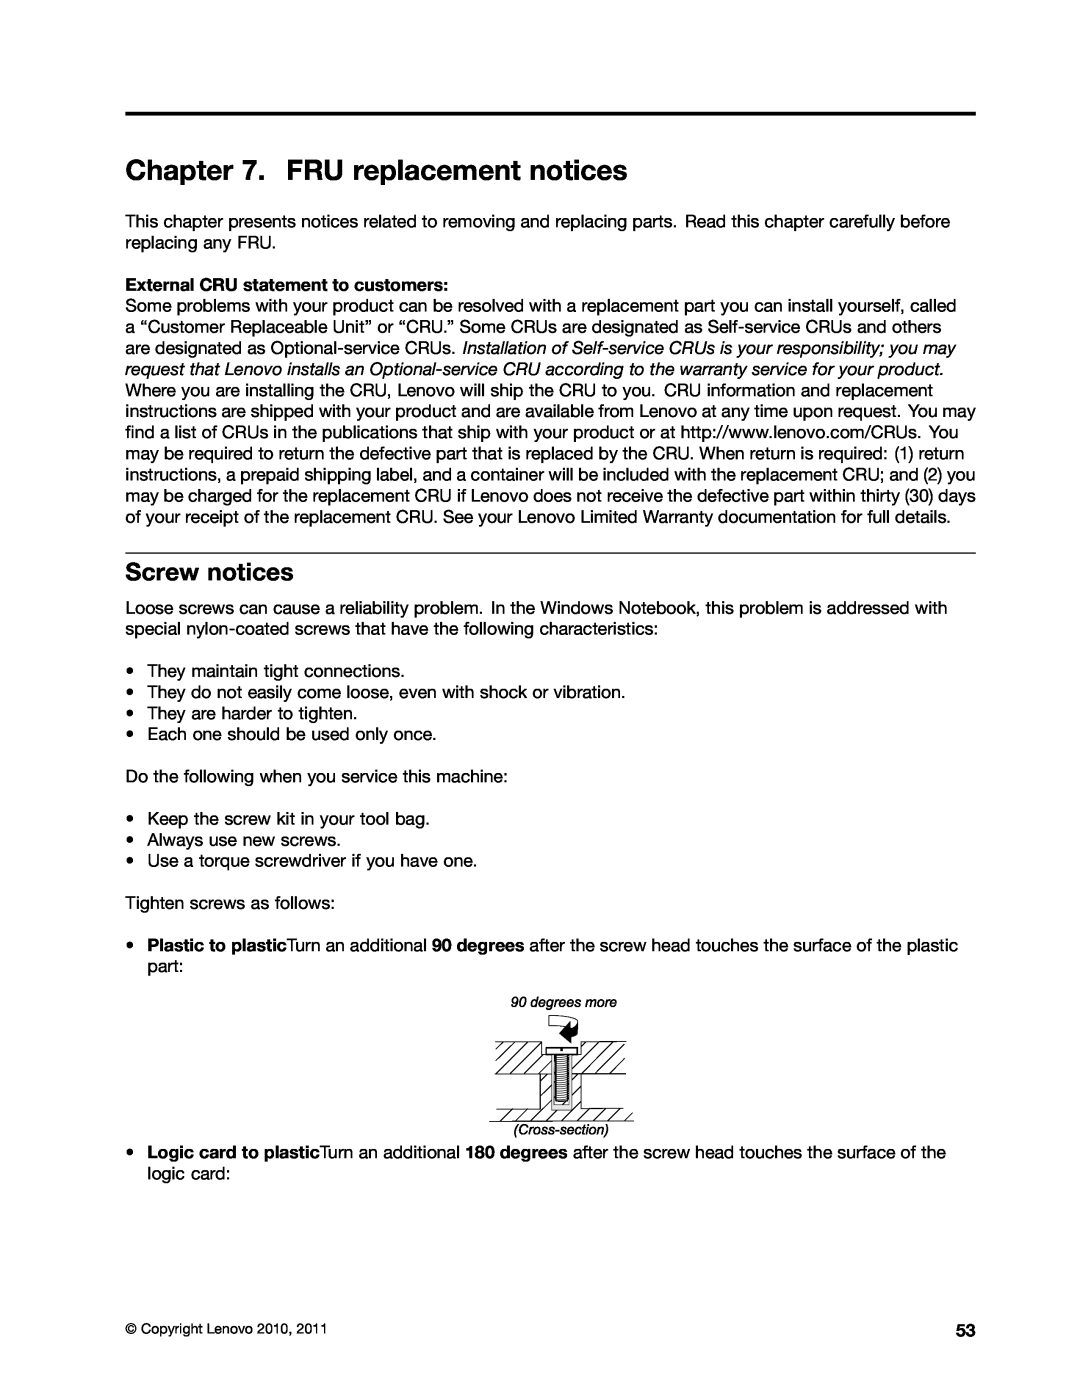 Lenovo E10 manual FRU replacement notices, Screw notices, External CRU statement to customers 